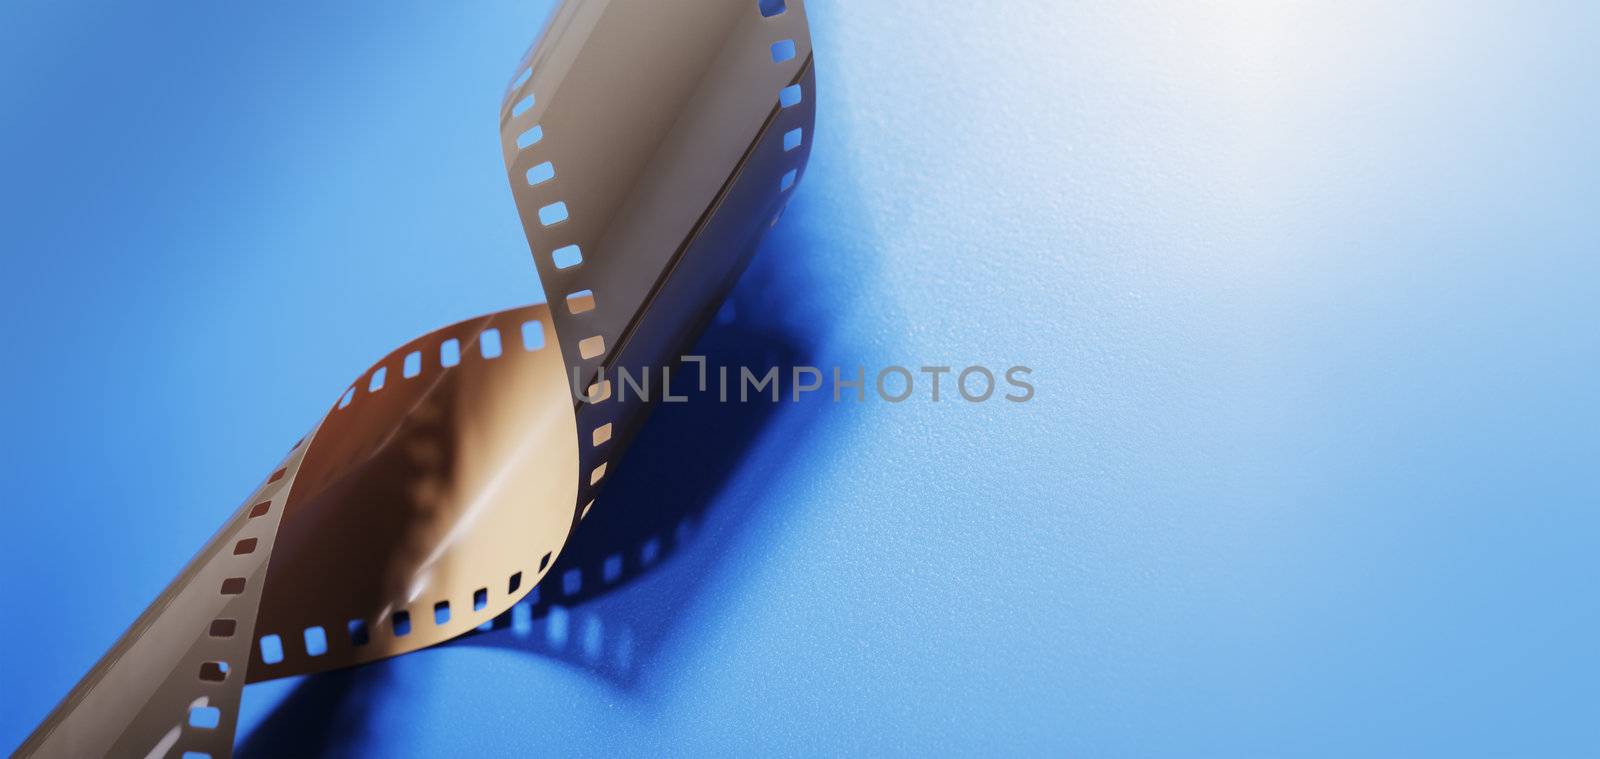 35mm Film on blue background with copy space.